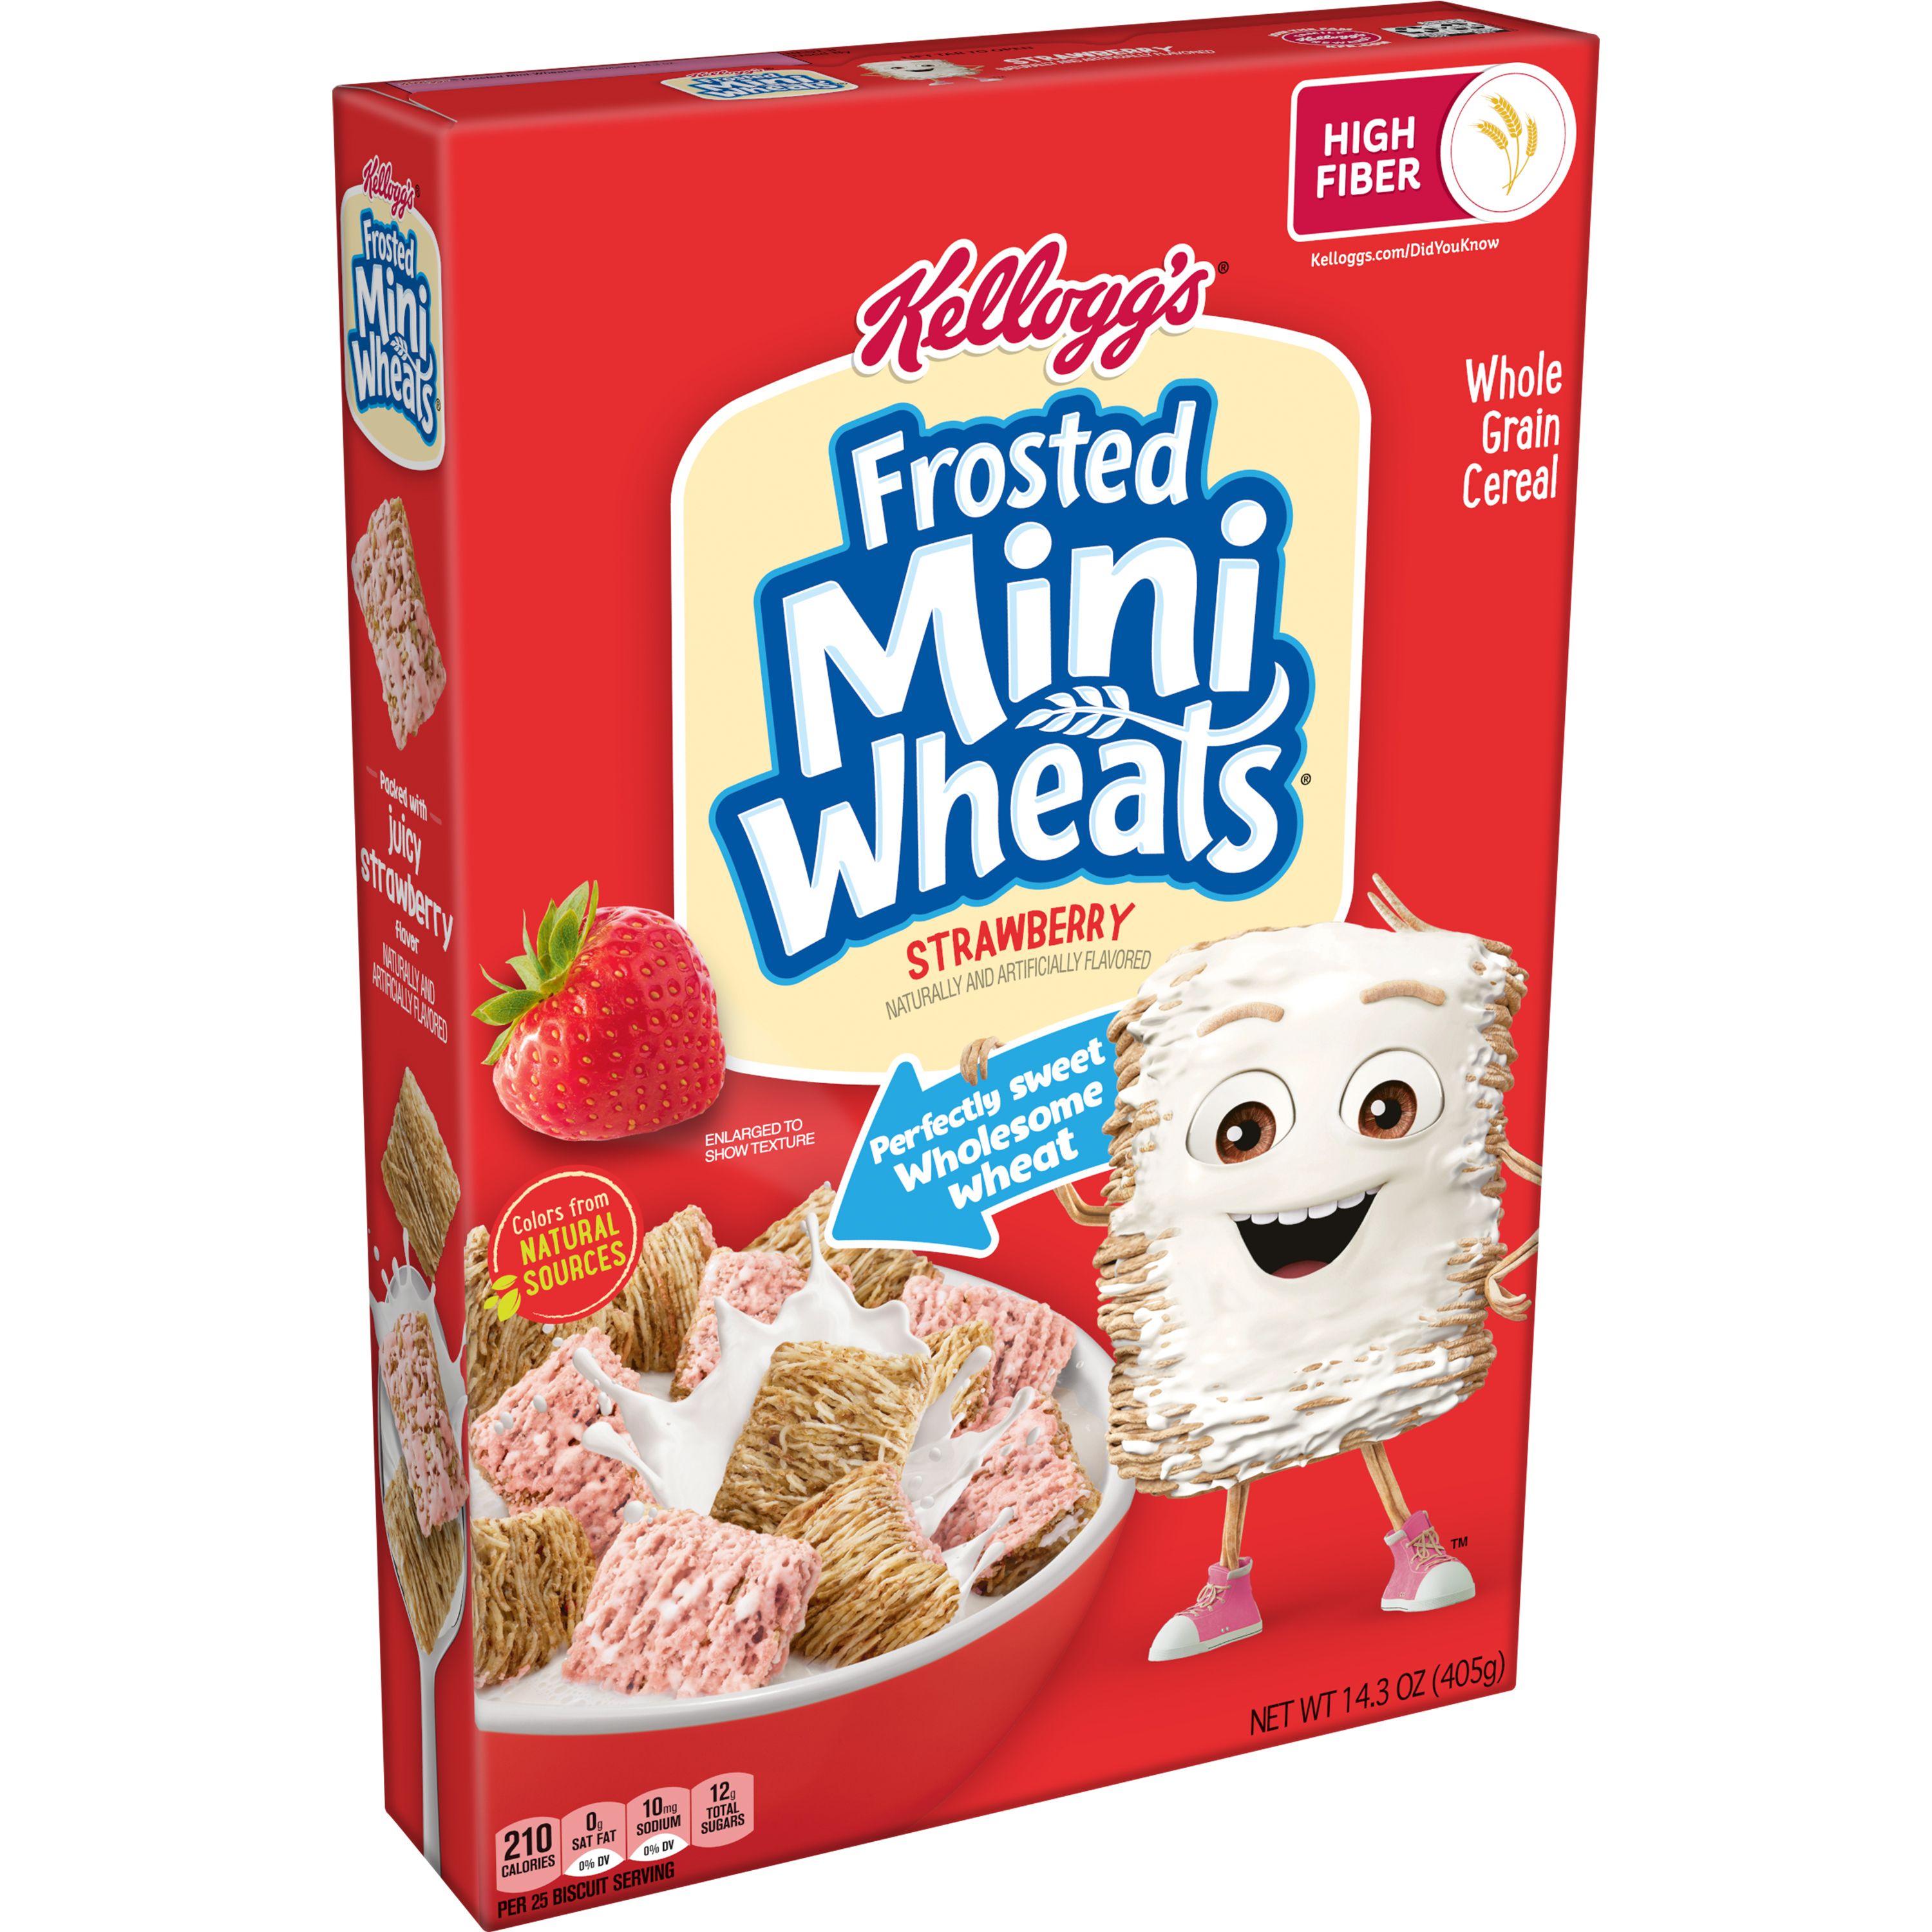 Frosted Mini Wheats Strawberry Cereal